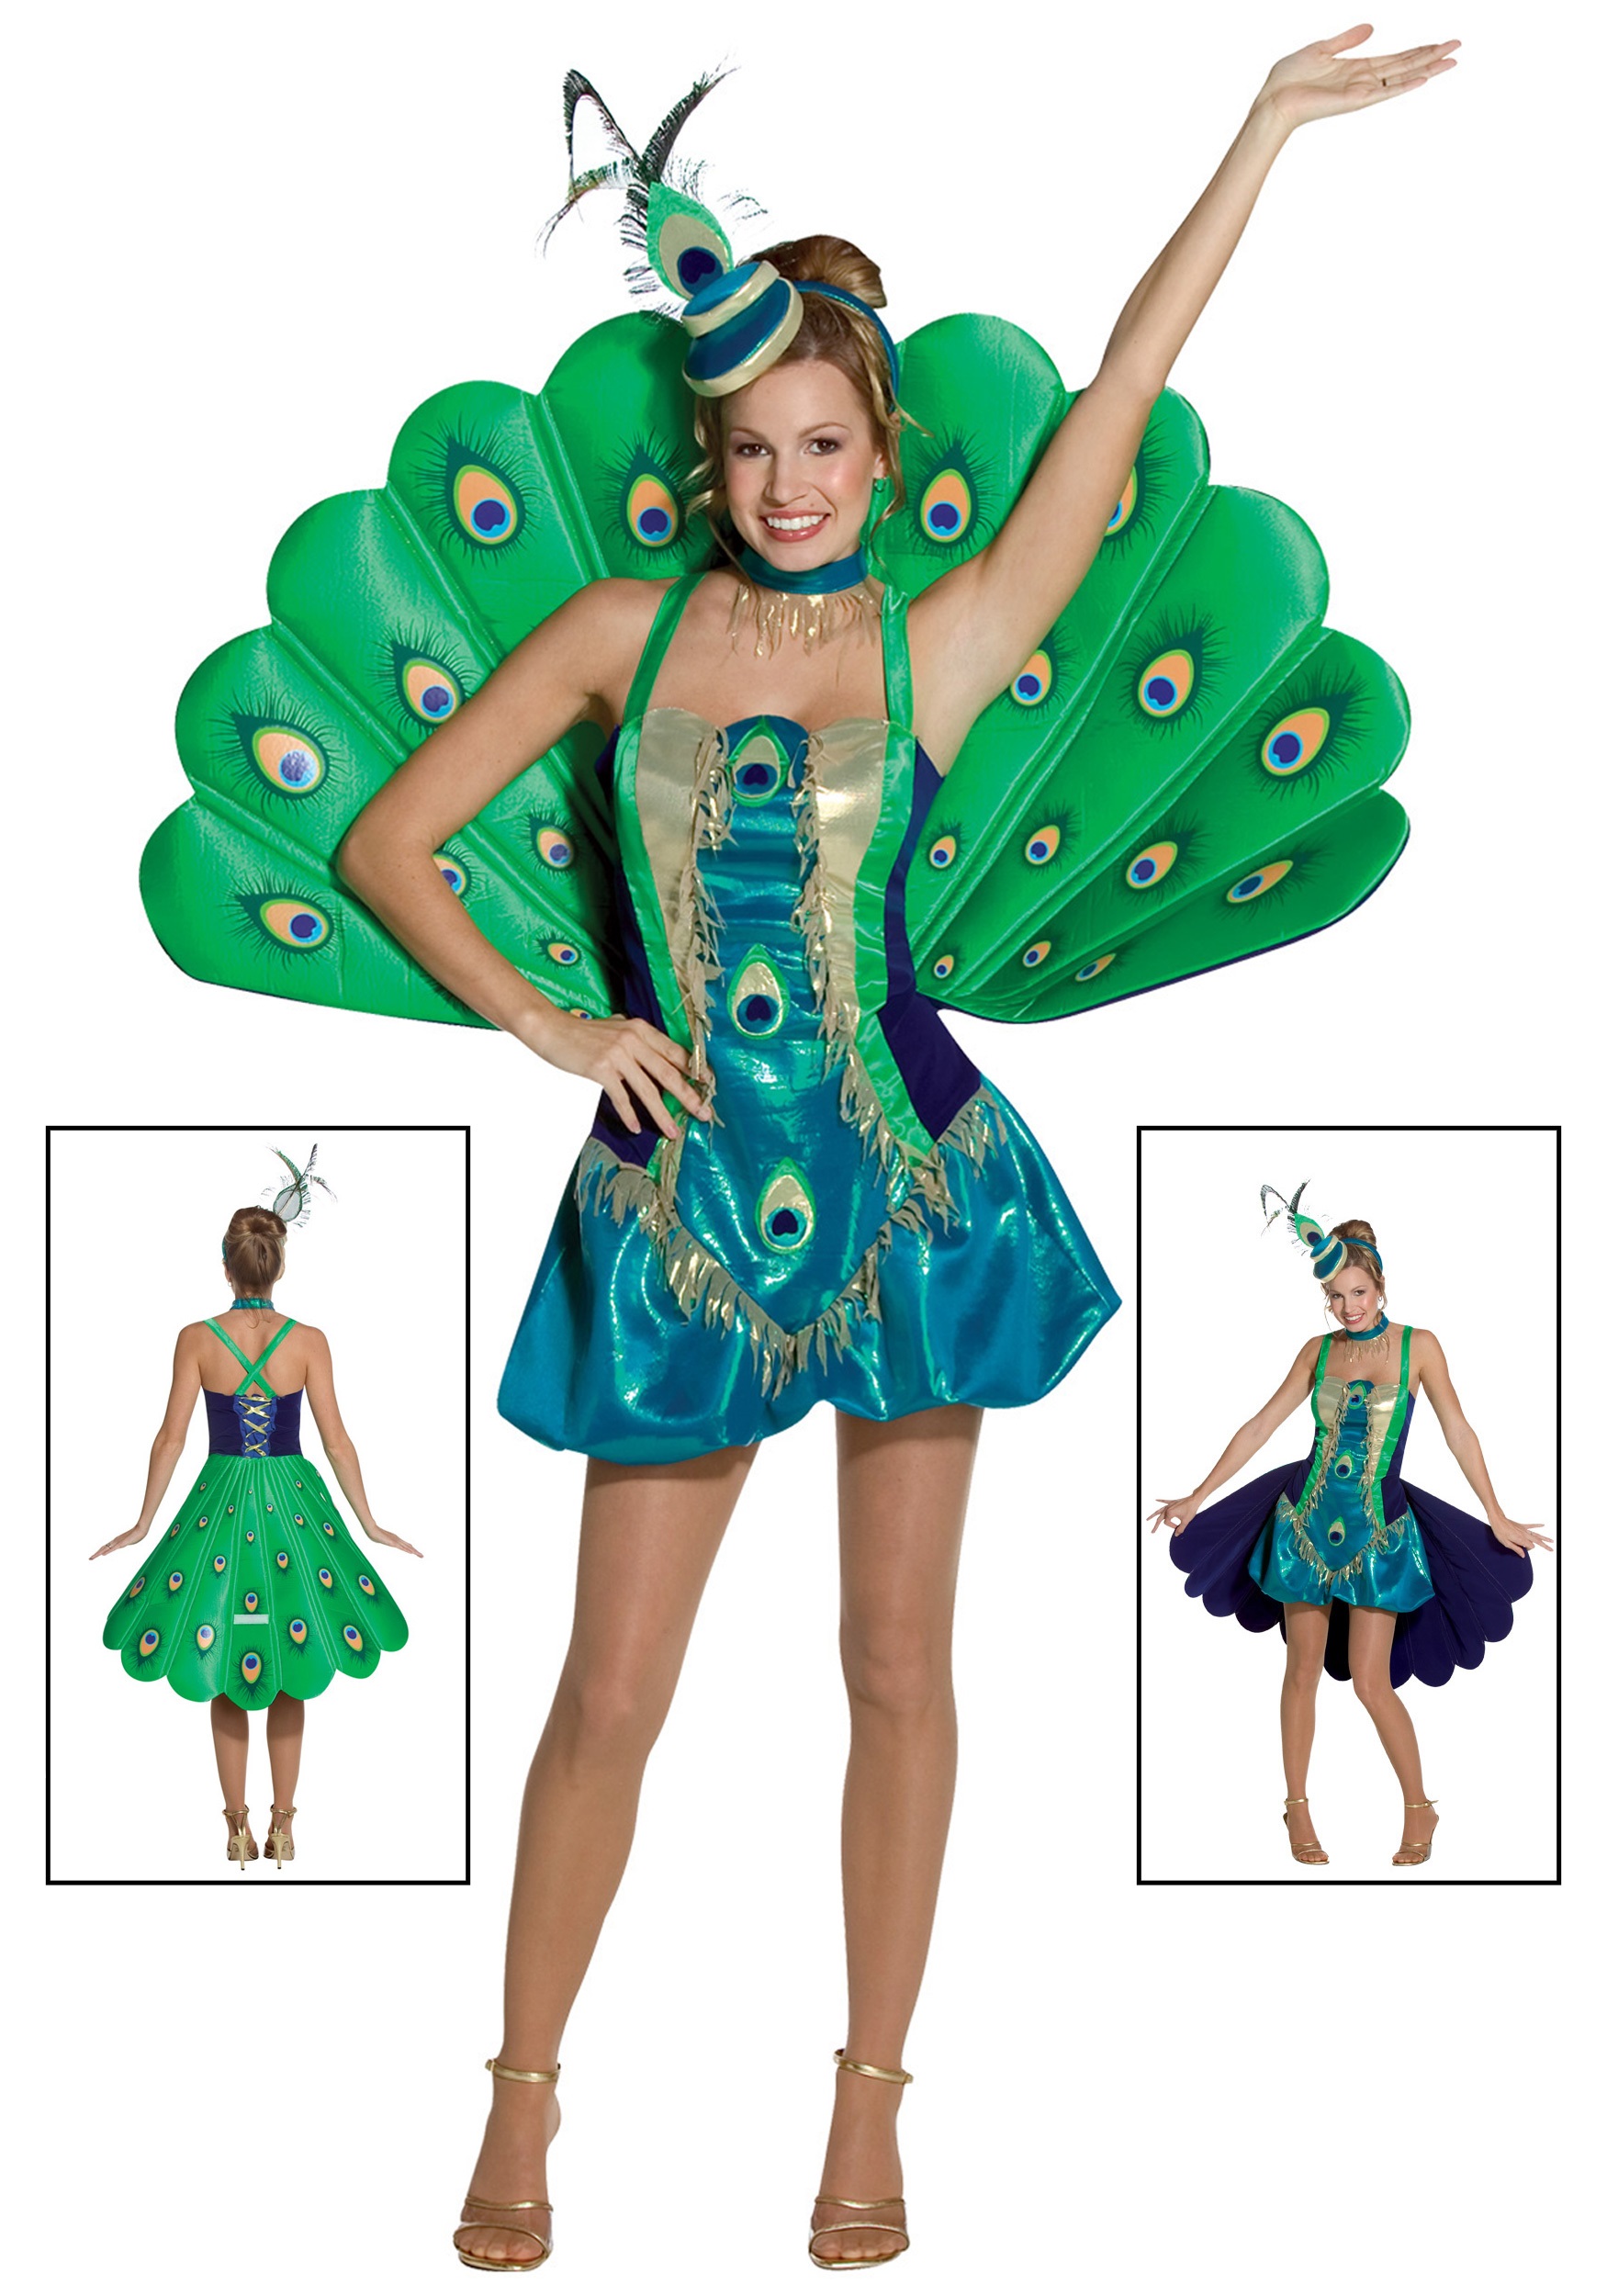 New Years Eve Peacock Suit | The Peacock Player